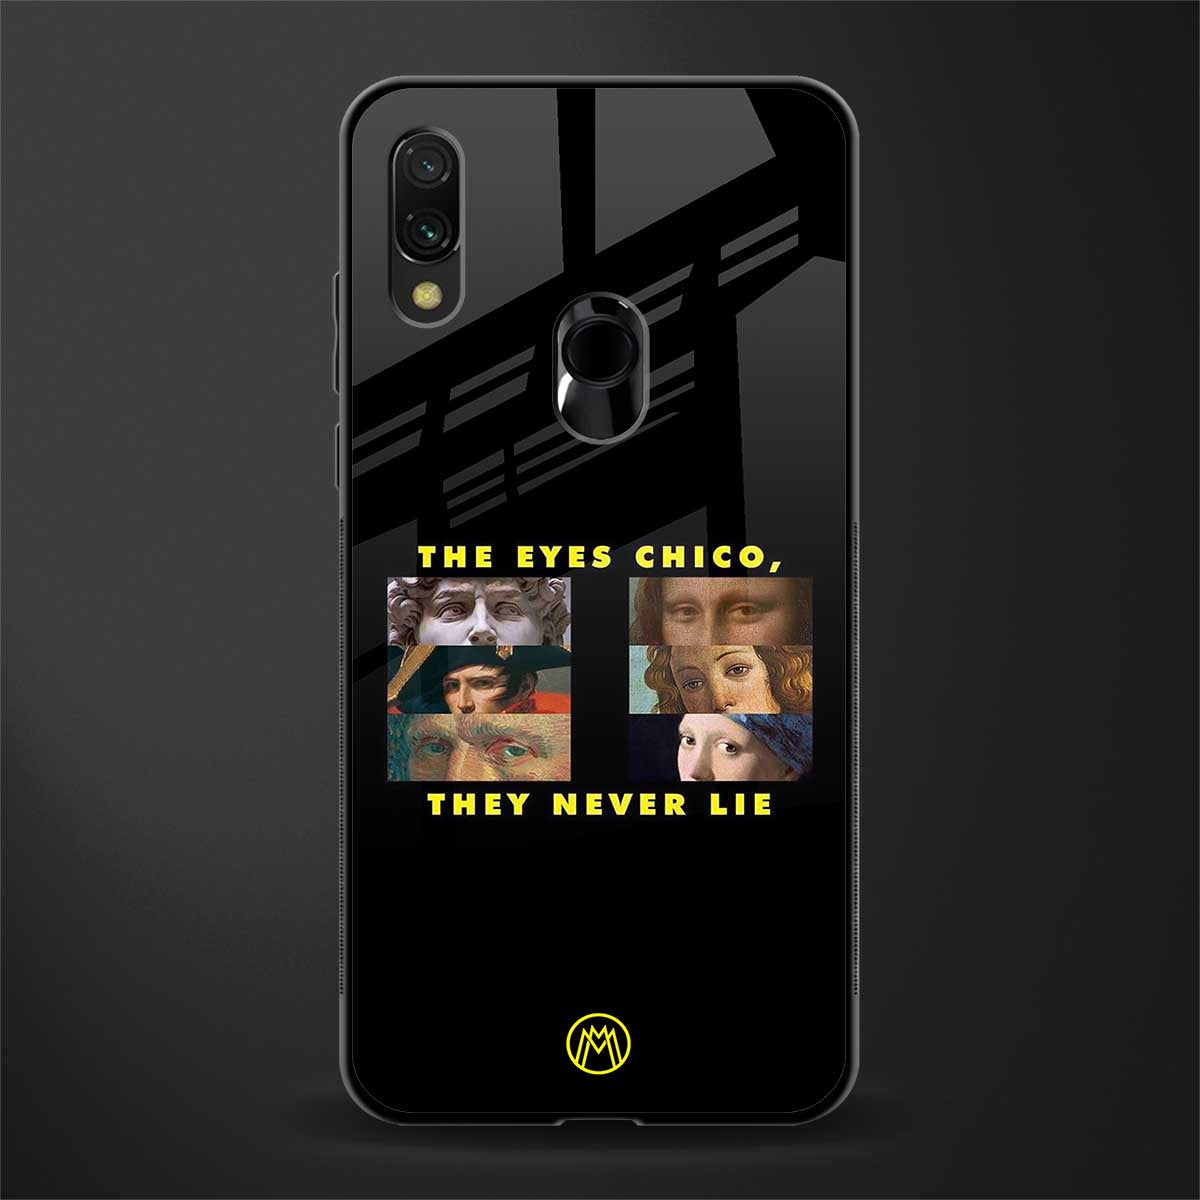 the eyes chico, they never lie movie quote glass case for redmi note 7 pro image